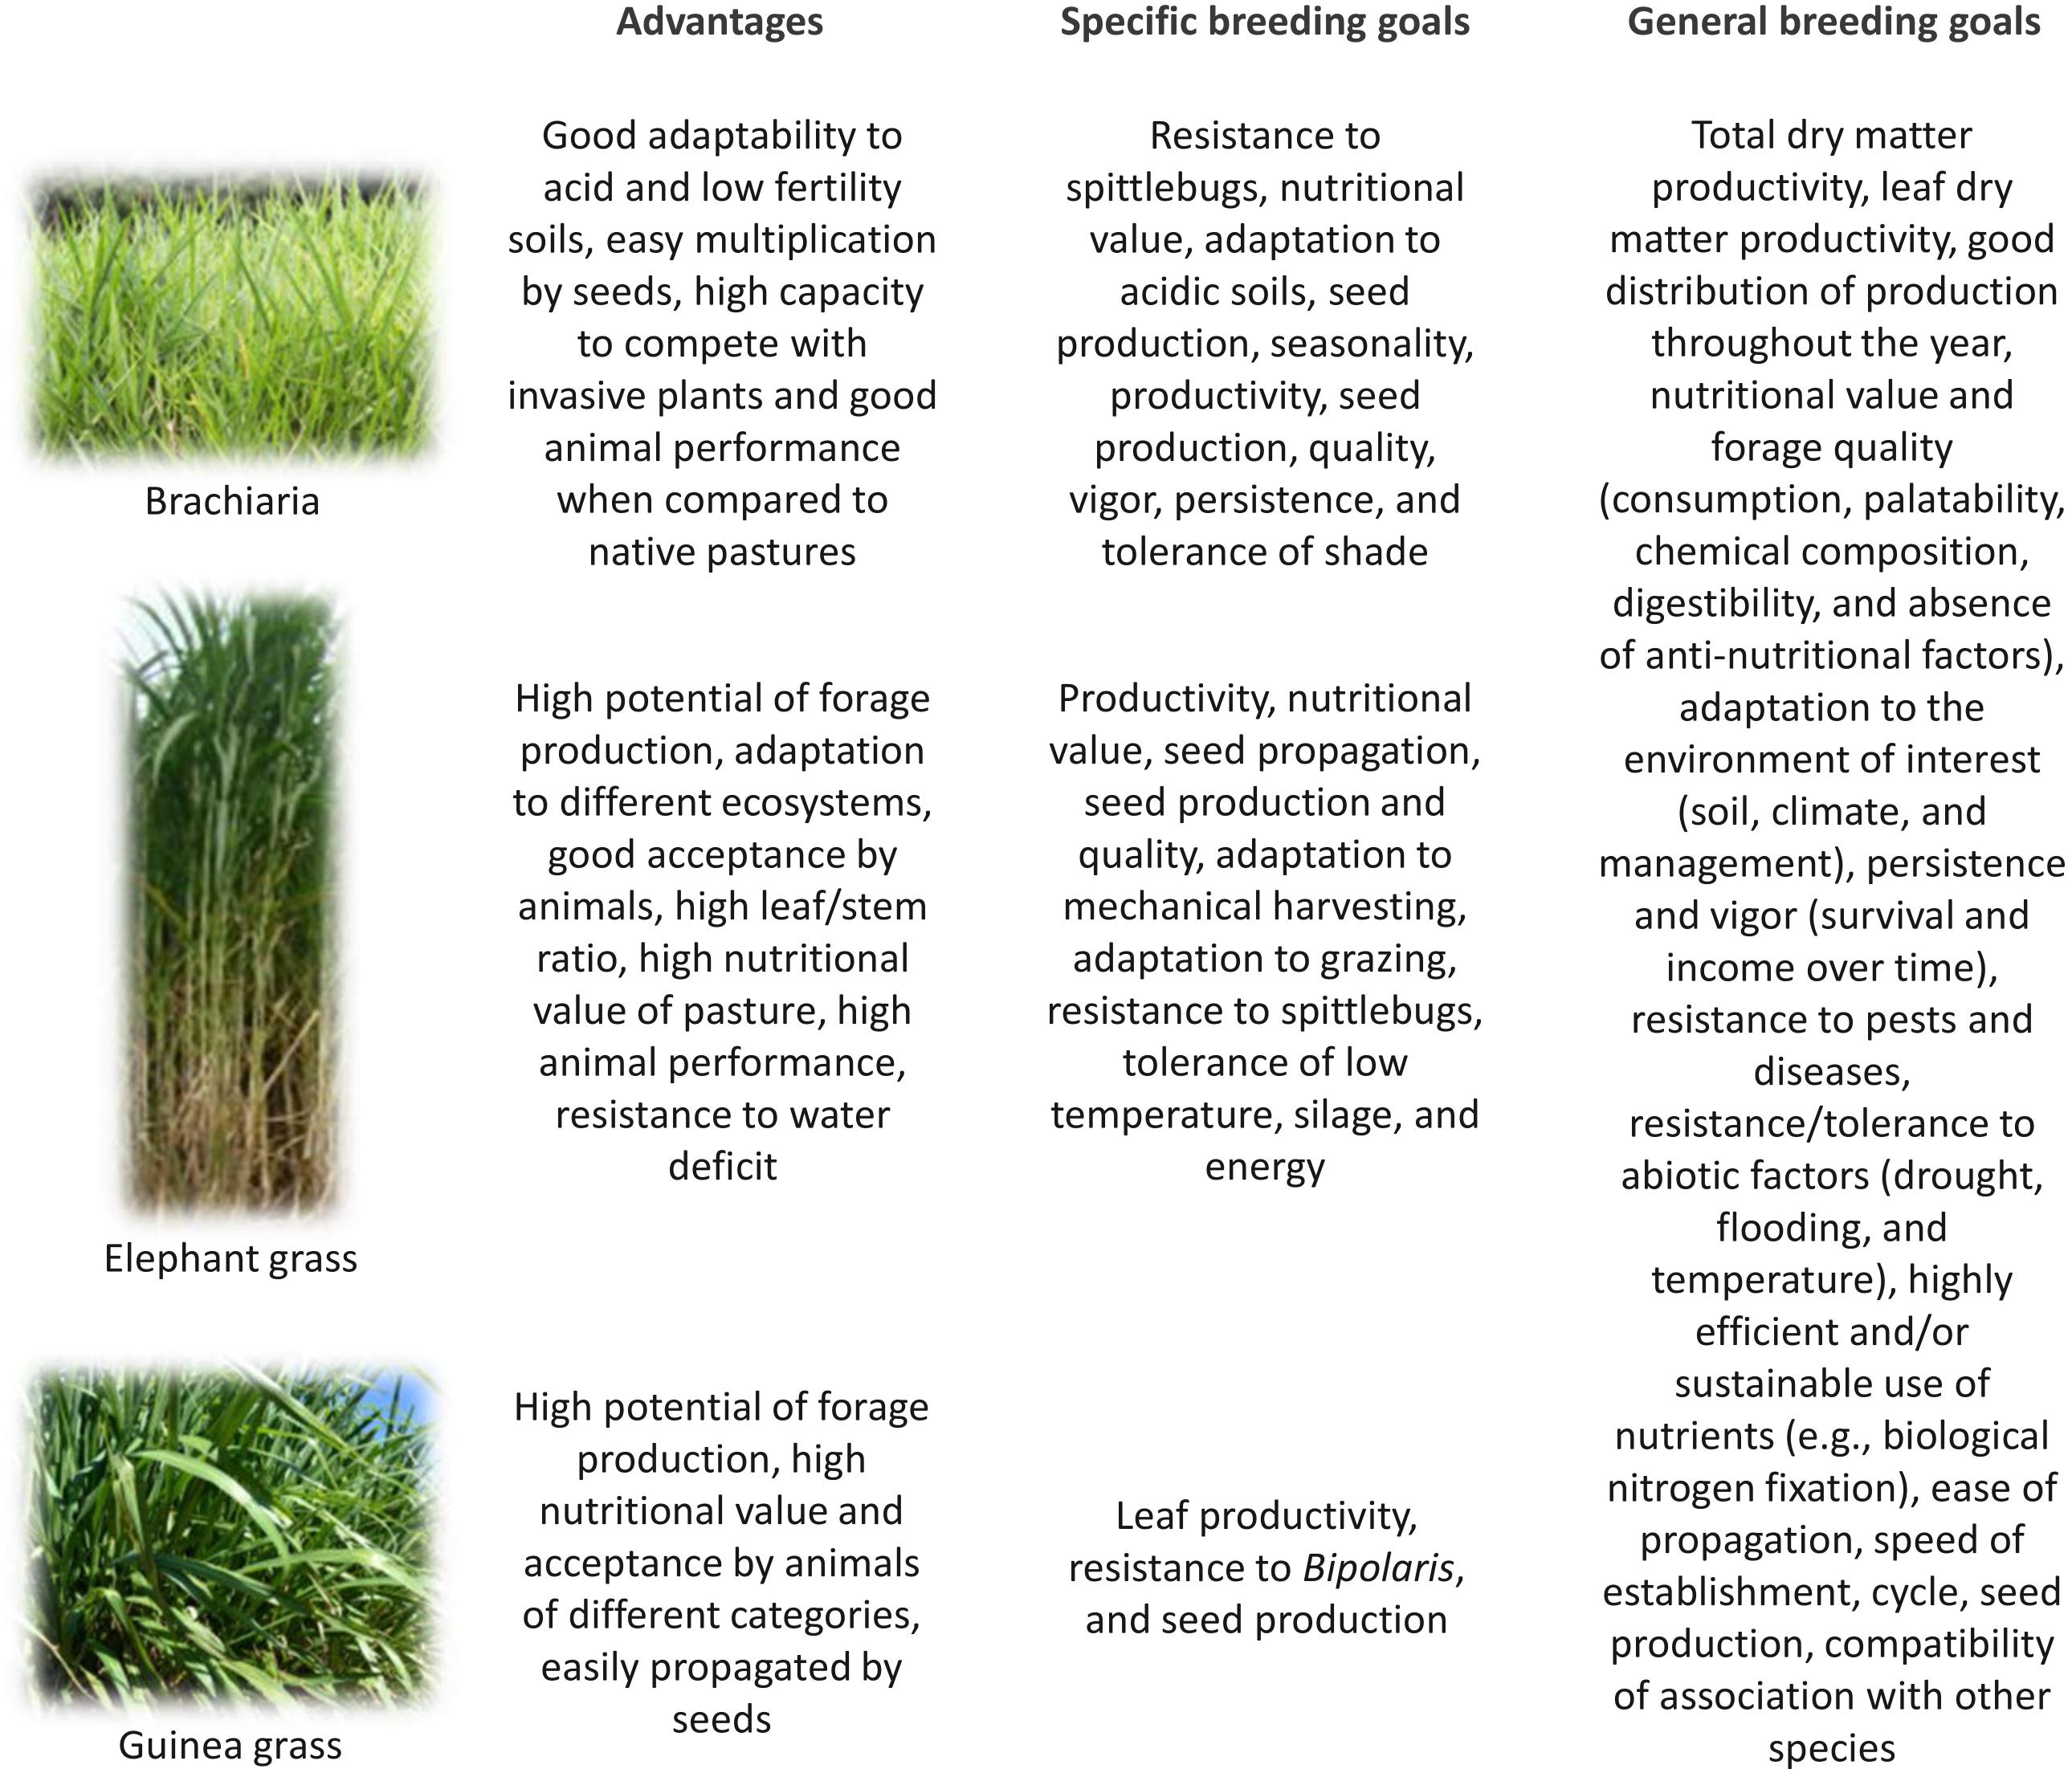 Frontiers | Genomic Selection in Tropical Forage Grasses: Current ...